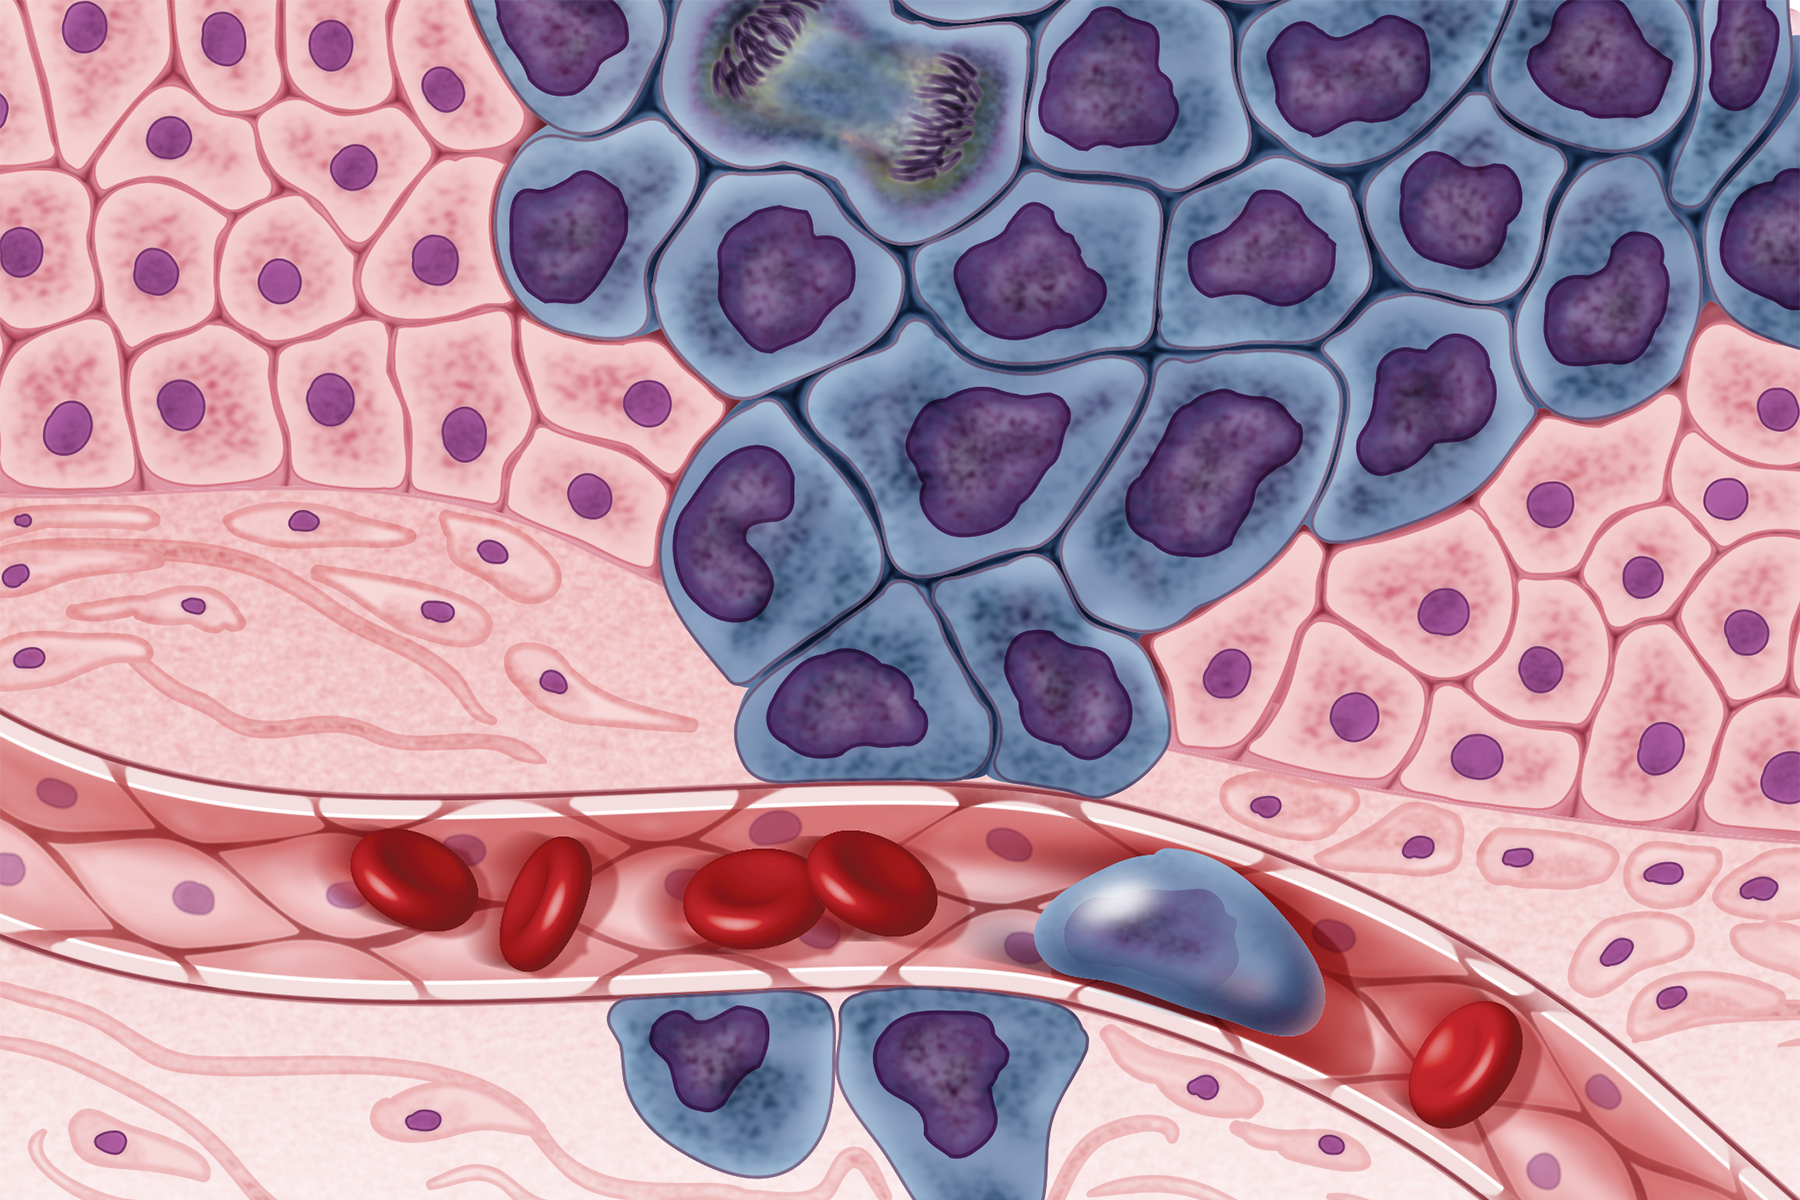 Pink, blue, and red depiction of cancer cells.